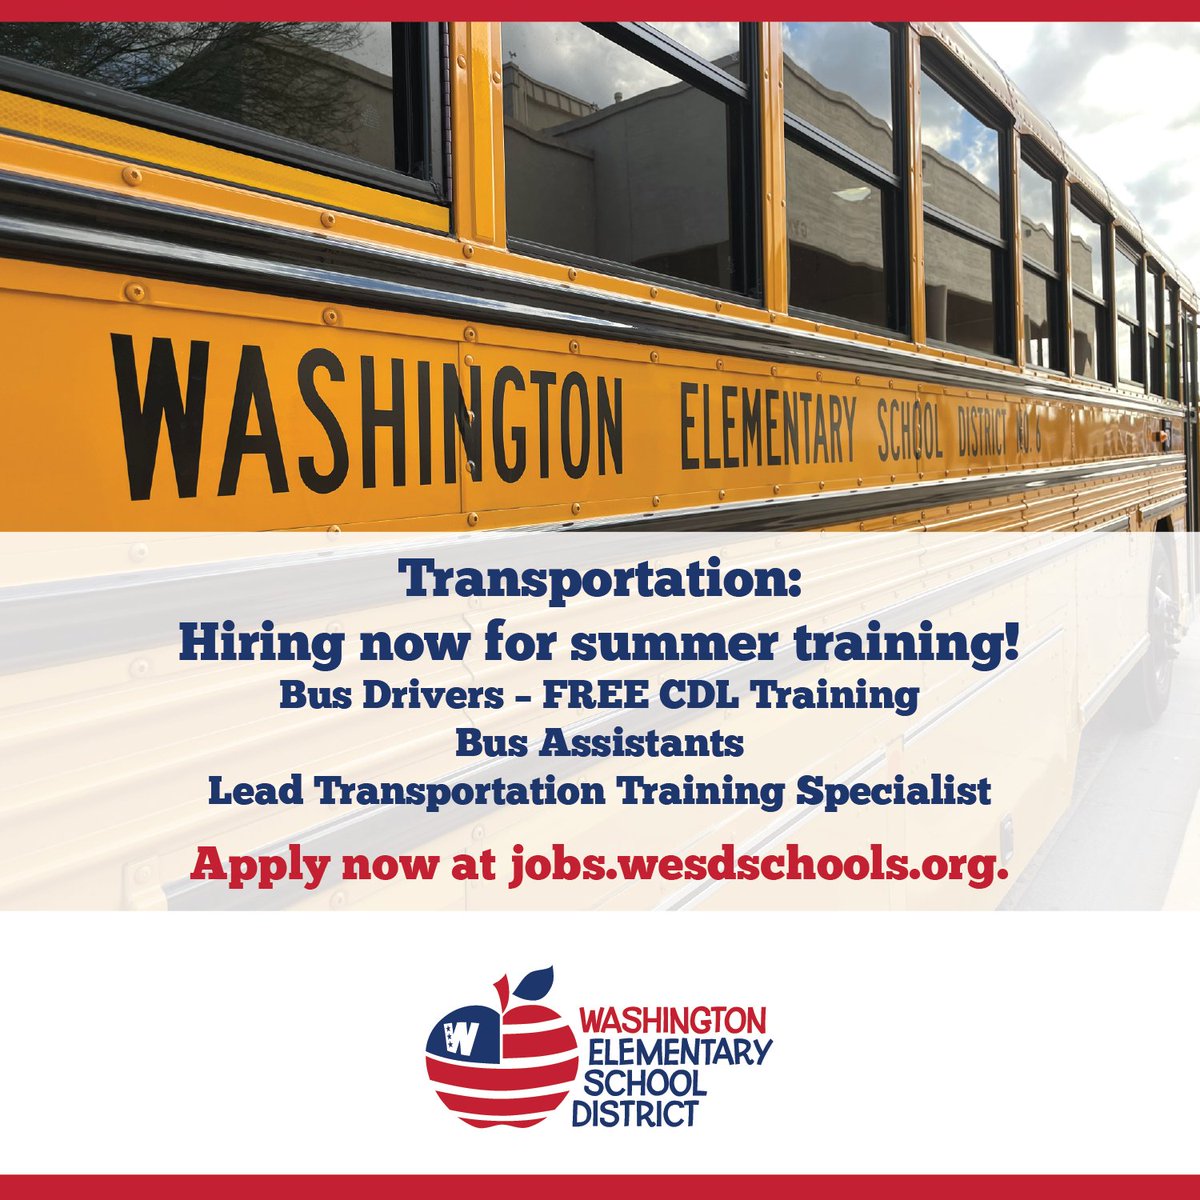 The WESD is searching for dedicated individuals to join our Transportation team to help ensure students get to and from school safely! To apply online, please visit jobs.wesdschools.org. #WESDFamily